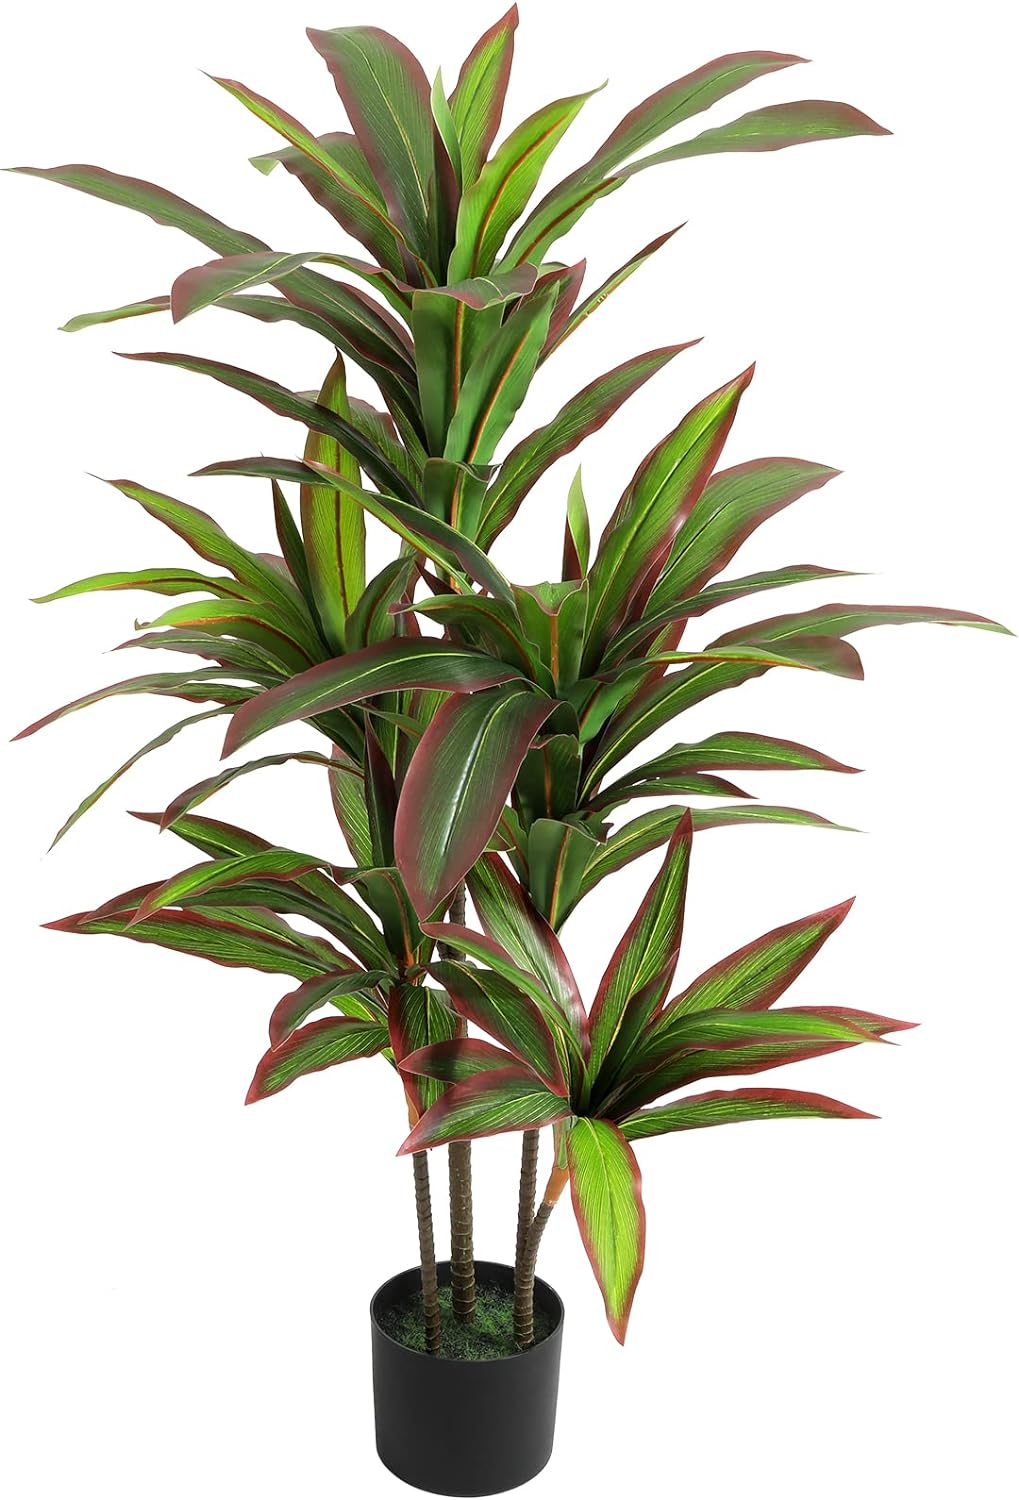 This is a very well-made silk plant and very life-like too! It is effortless to shape the leaves, and it completes the look. I give you an A rating all around for this product.